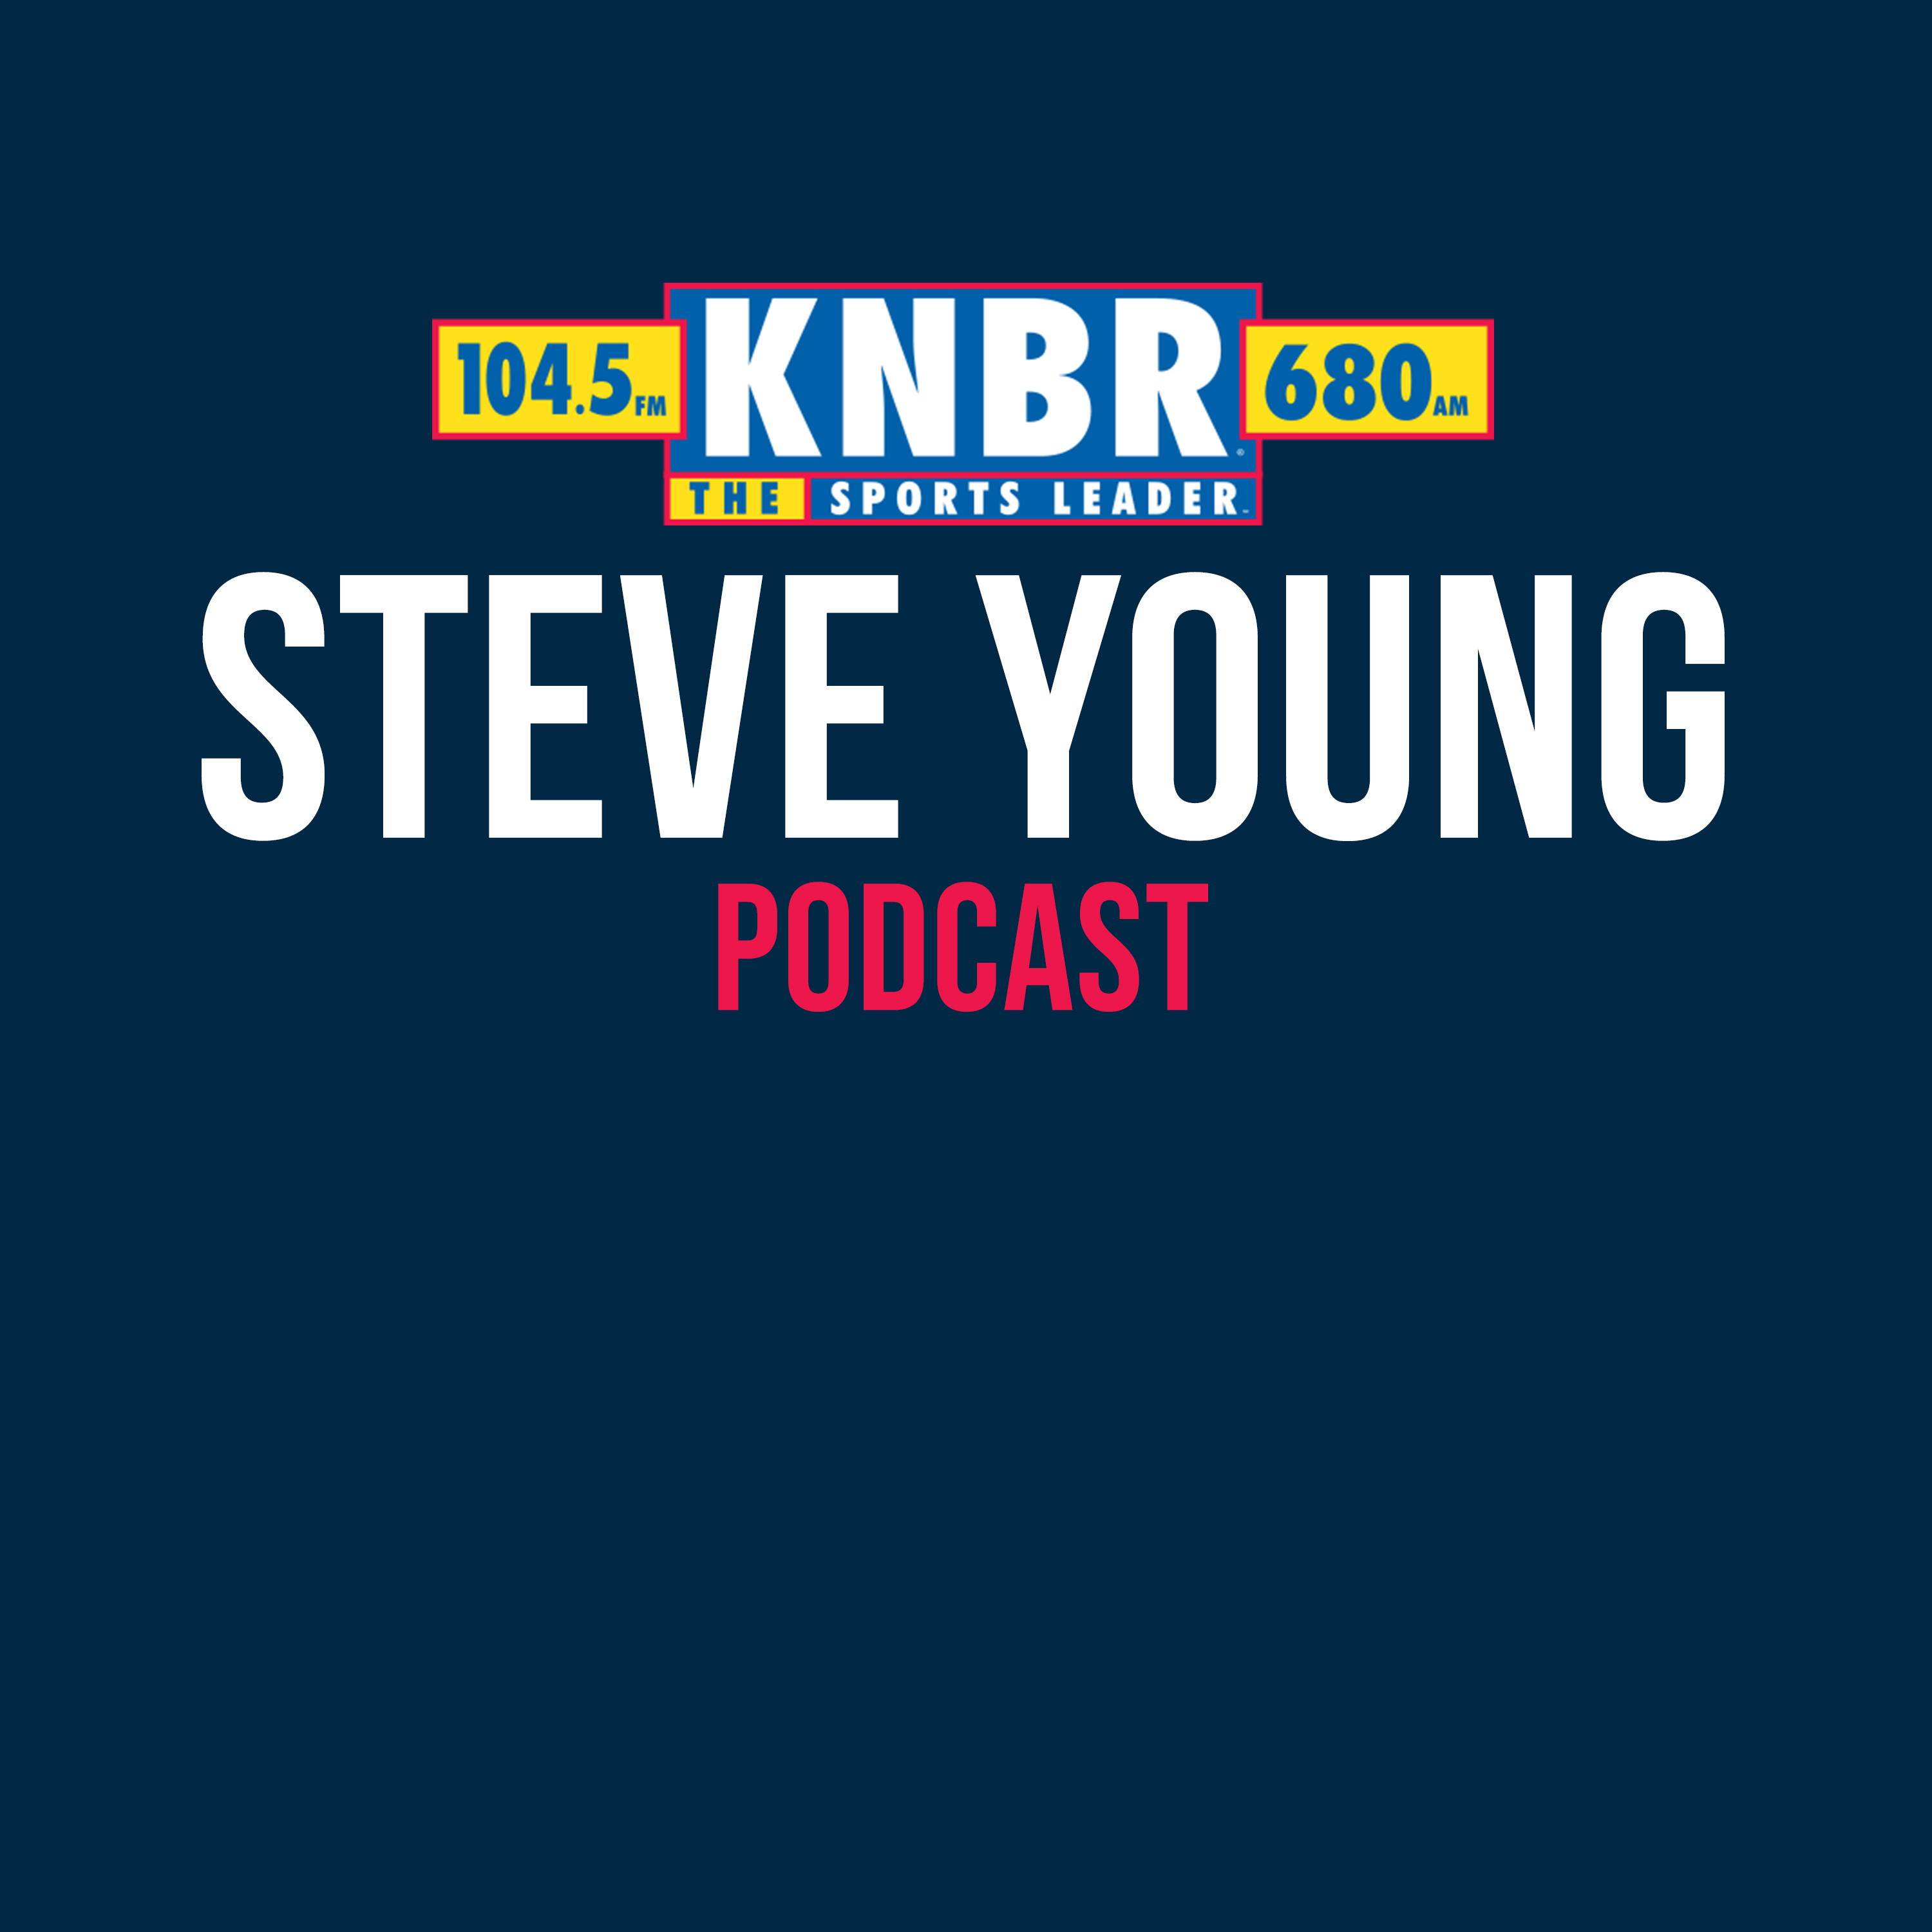 2-15 Steve Young joins Tolbert & Copes to review Super Bowl 57 & looks to next 49ers season